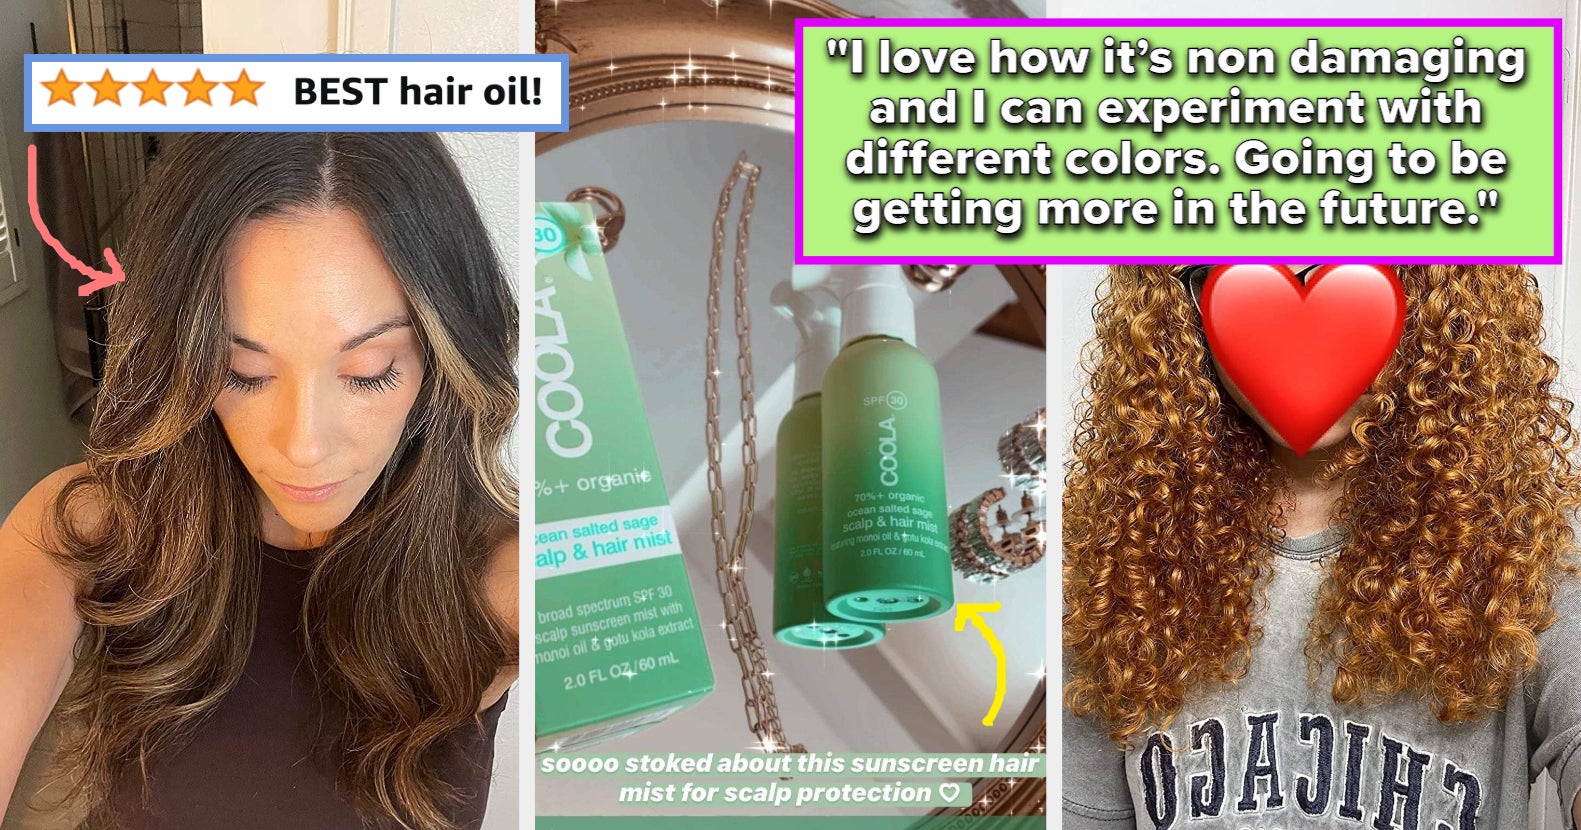 26 Luxury Hair Products For Will Beg Amazon on Stylist Your